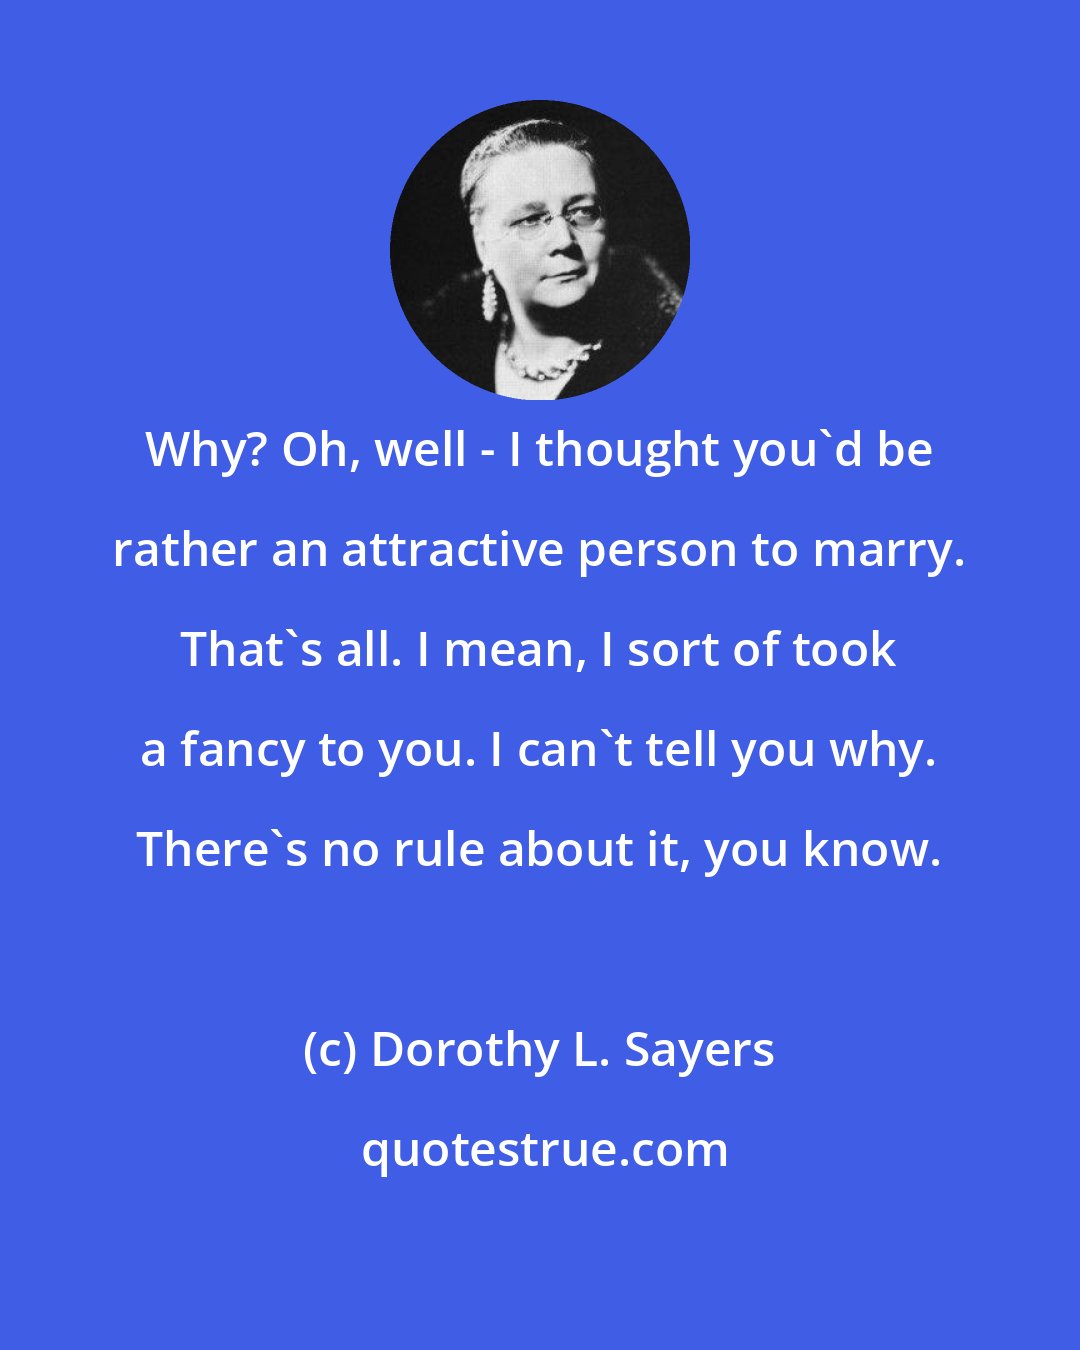 Dorothy L. Sayers: Why? Oh, well - I thought you'd be rather an attractive person to marry. That's all. I mean, I sort of took a fancy to you. I can't tell you why. There's no rule about it, you know.